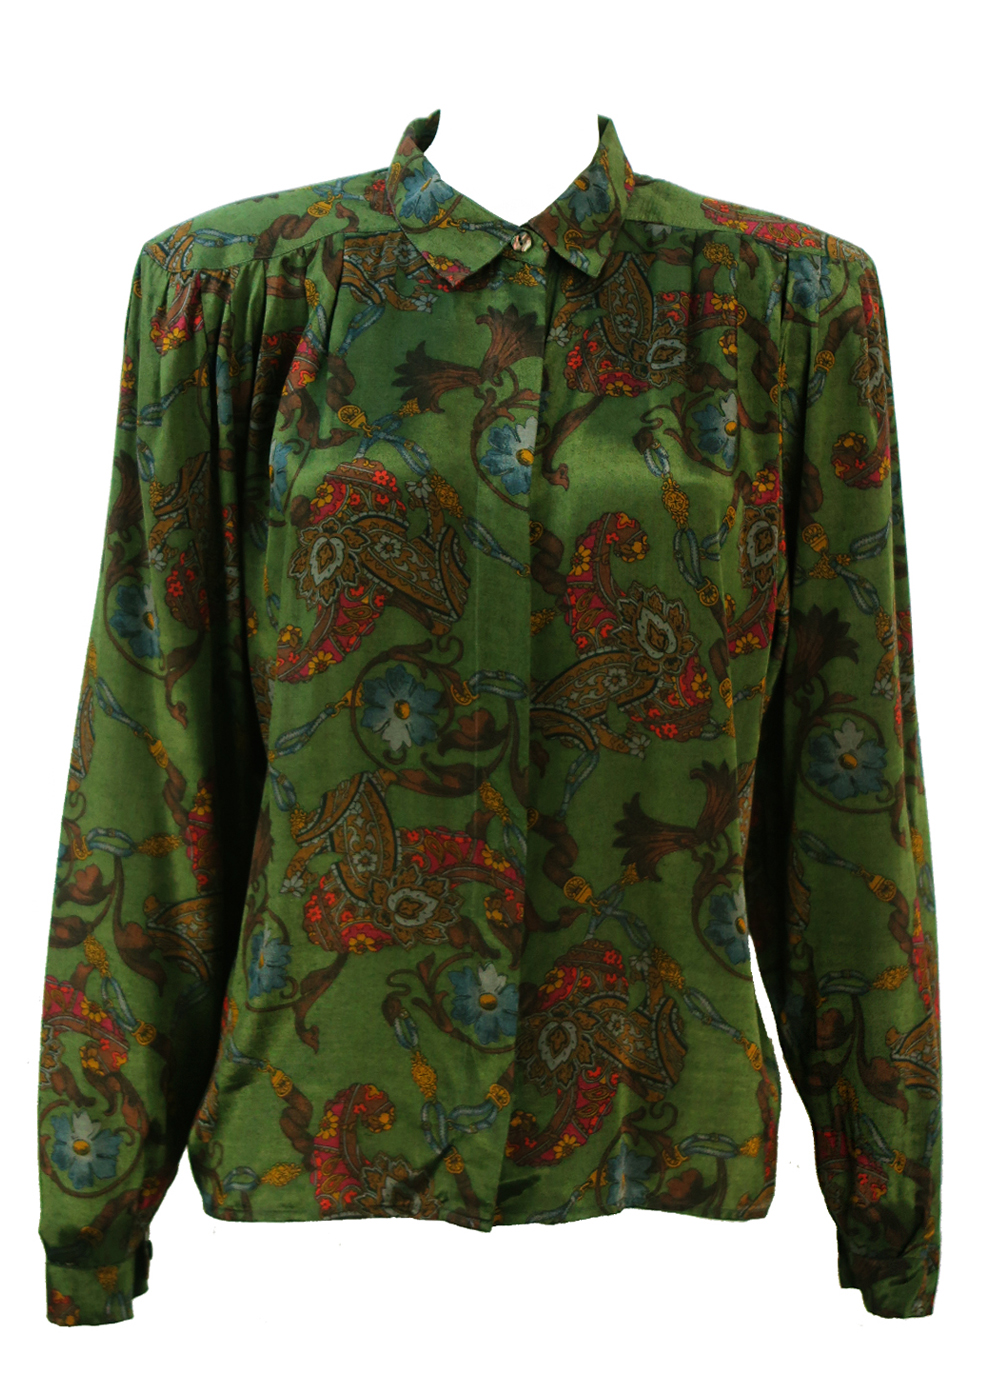 Woodland Green Long Sleeved Blouse with Heraldic Print - L | Reign Vintage